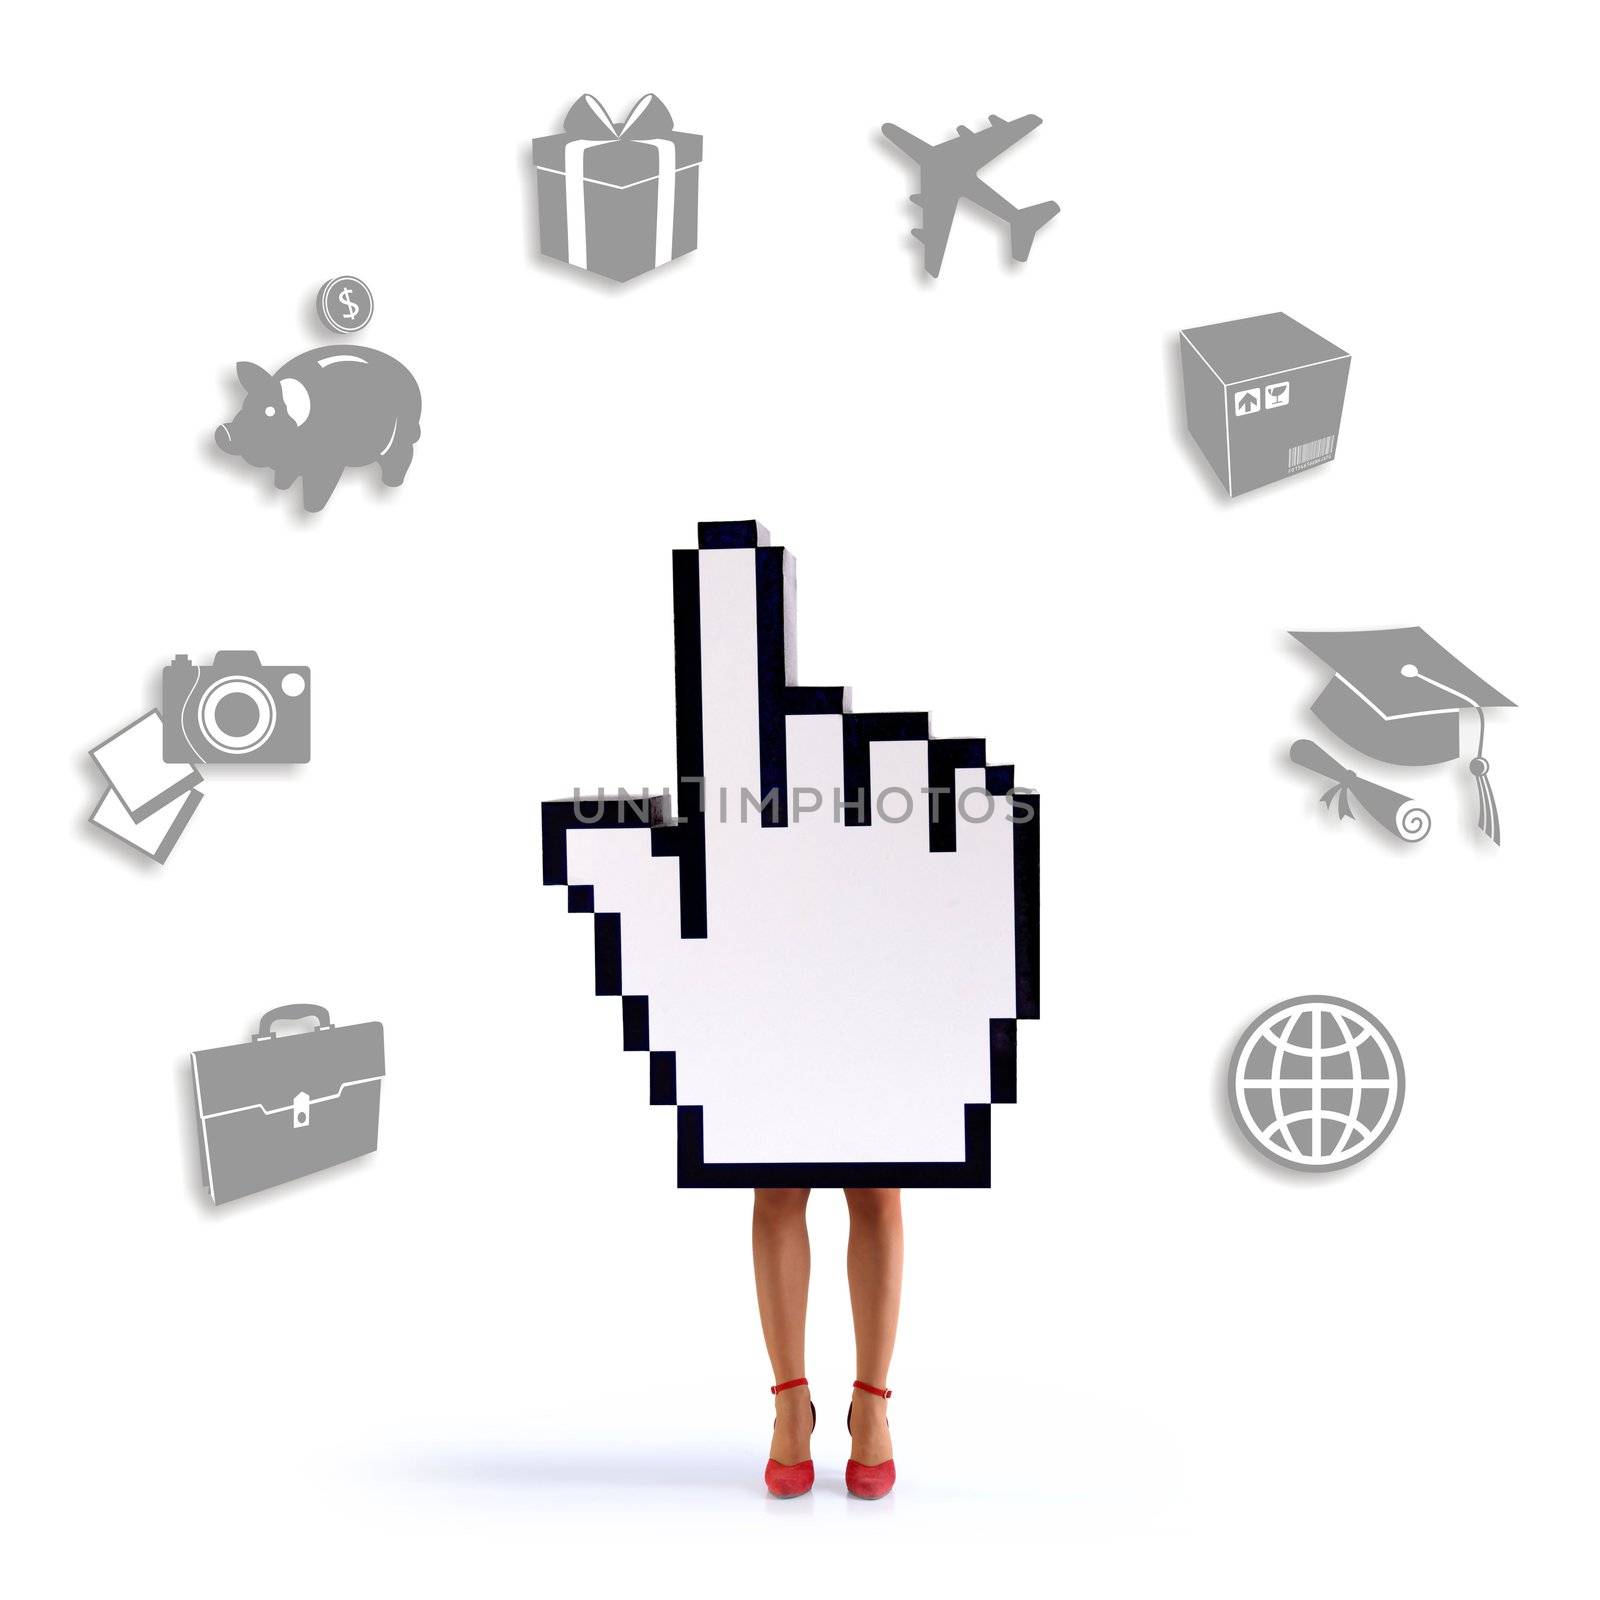 Hand cursor with female legs sorrounded of e-commerce icons. White background. PSD file with paths available.